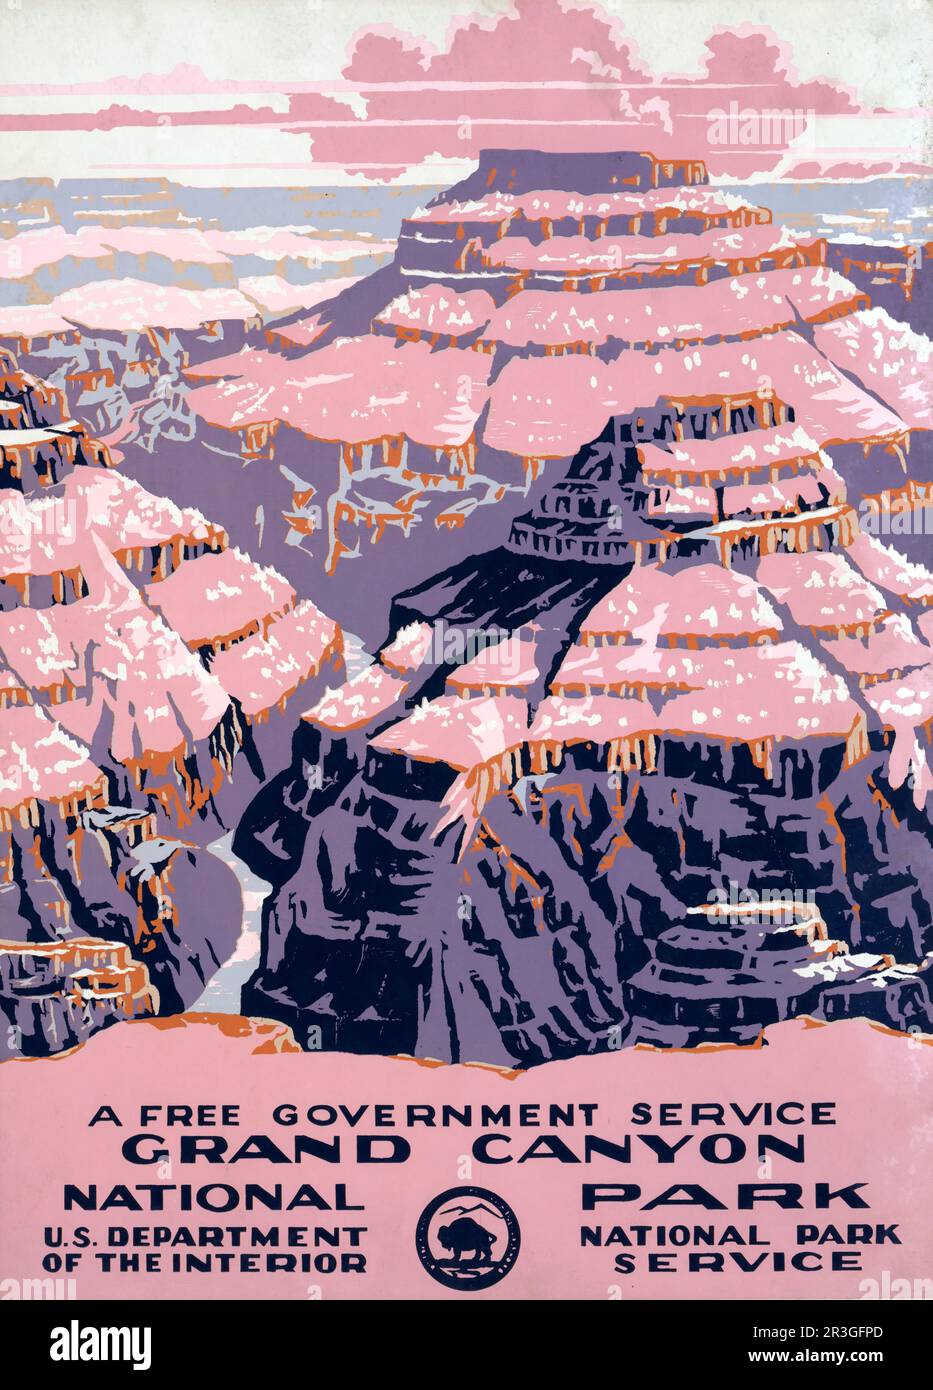 Vintage travel poster shows views of Grand Canyon National Park, a free government service, circa 1938. Stock Photo